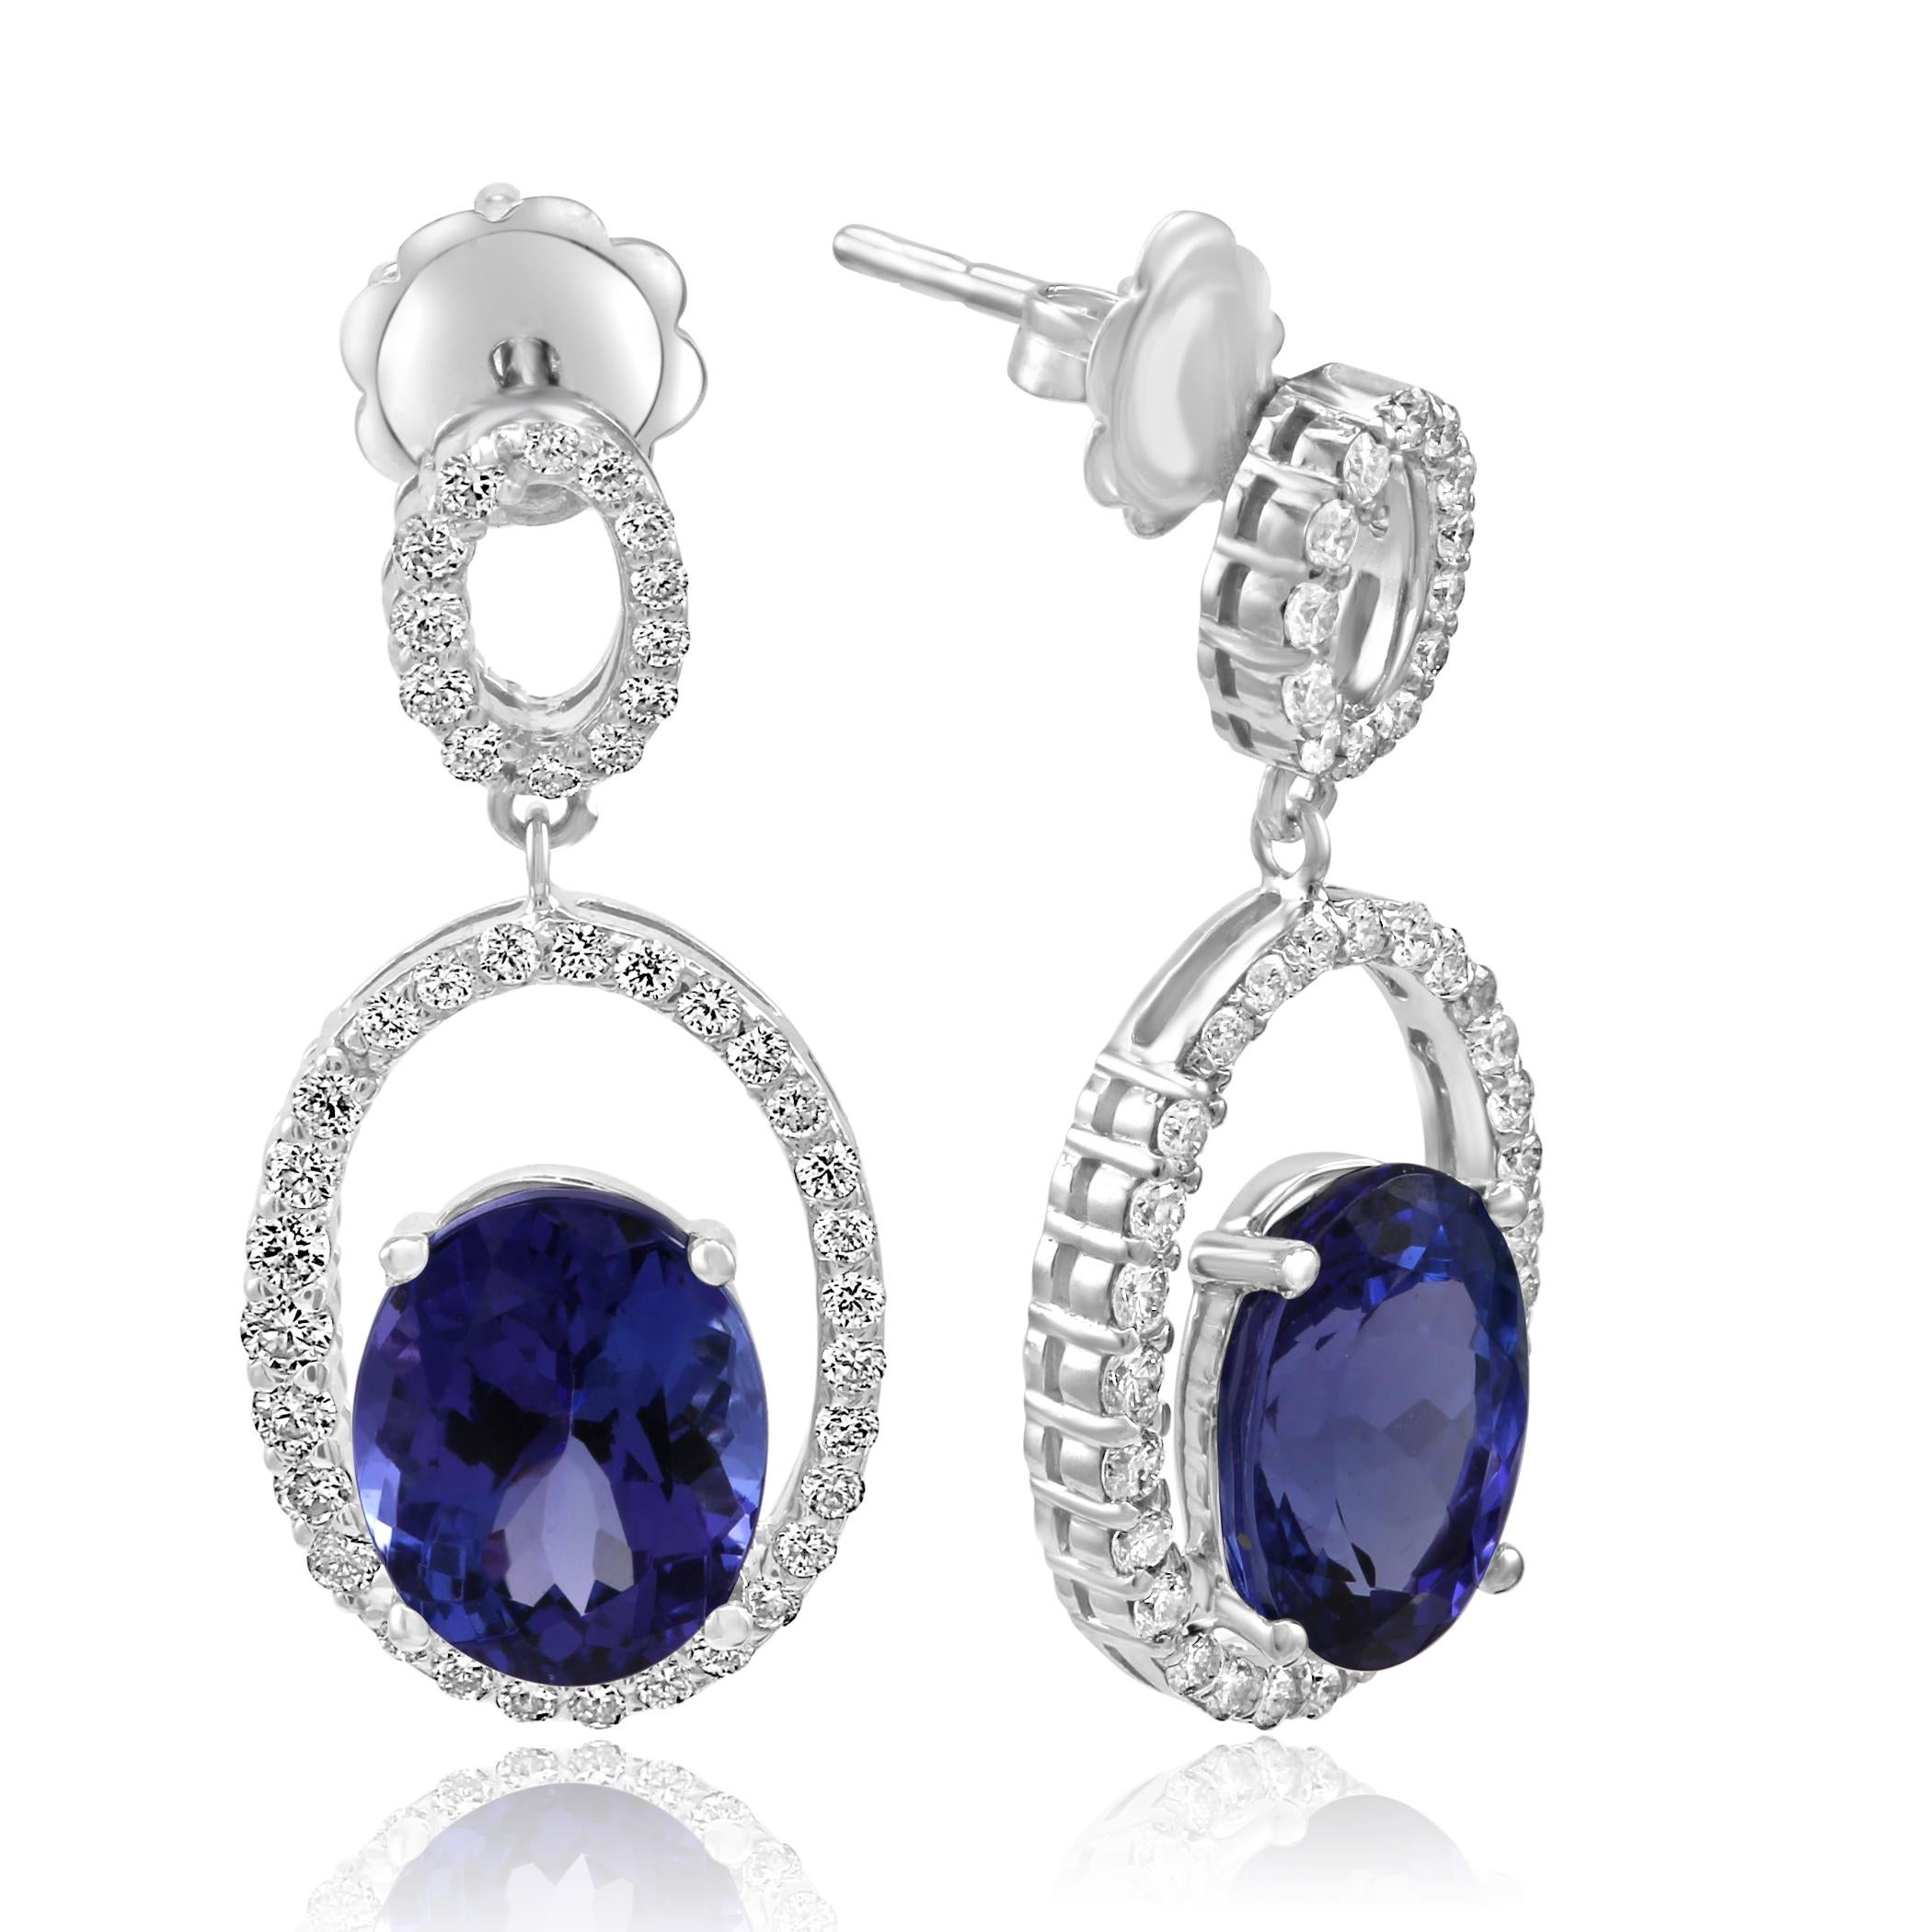 Gorgeous 2 Tanzanite Ovals 6.02 Carats Encircled in Single halo of White G-H Color VS-SI Diamond Rounds 0.78 Carat 14K White Gold Dangle Drop Fashion Earring.

Style available in different price ranges. Prices are based on your selection of 4C's i.e